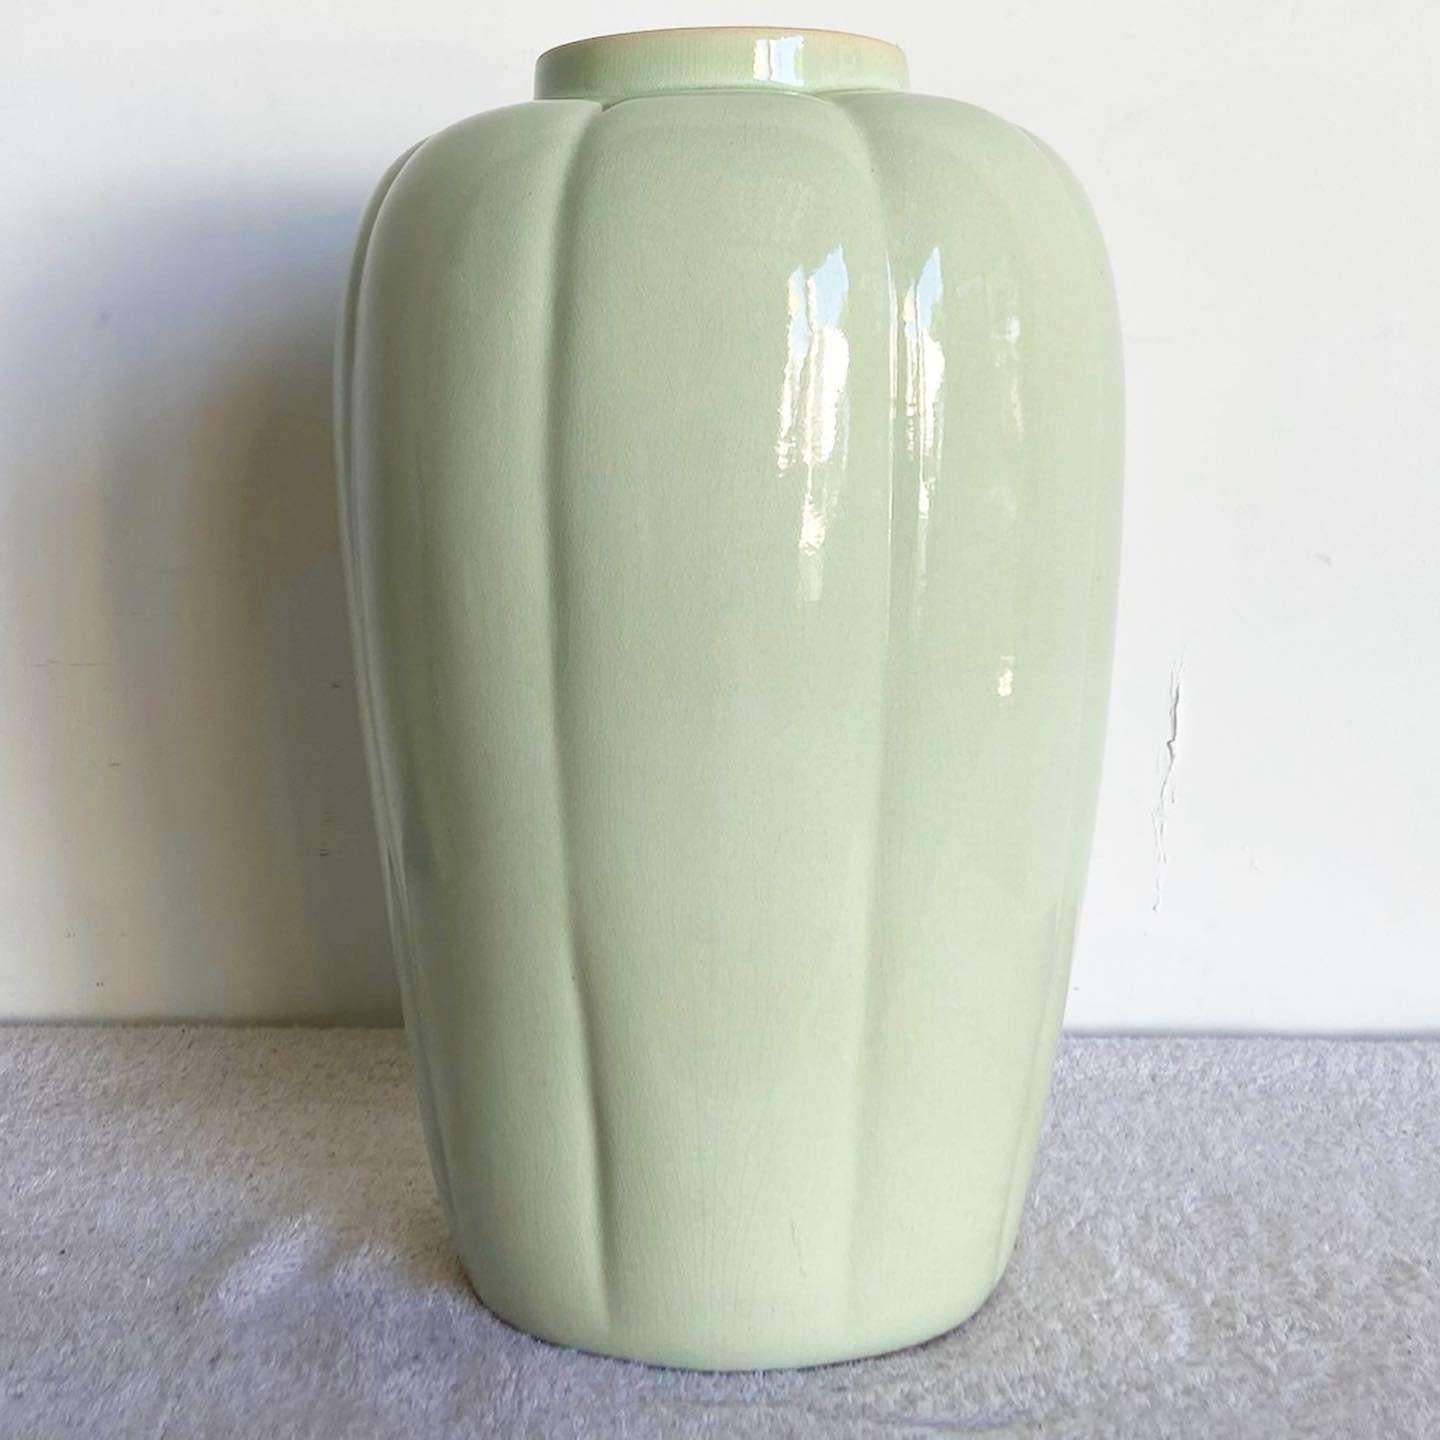 Incredible vintage postmodern ceramic vase. Features a gloss might green finish with a scalloped shape.
